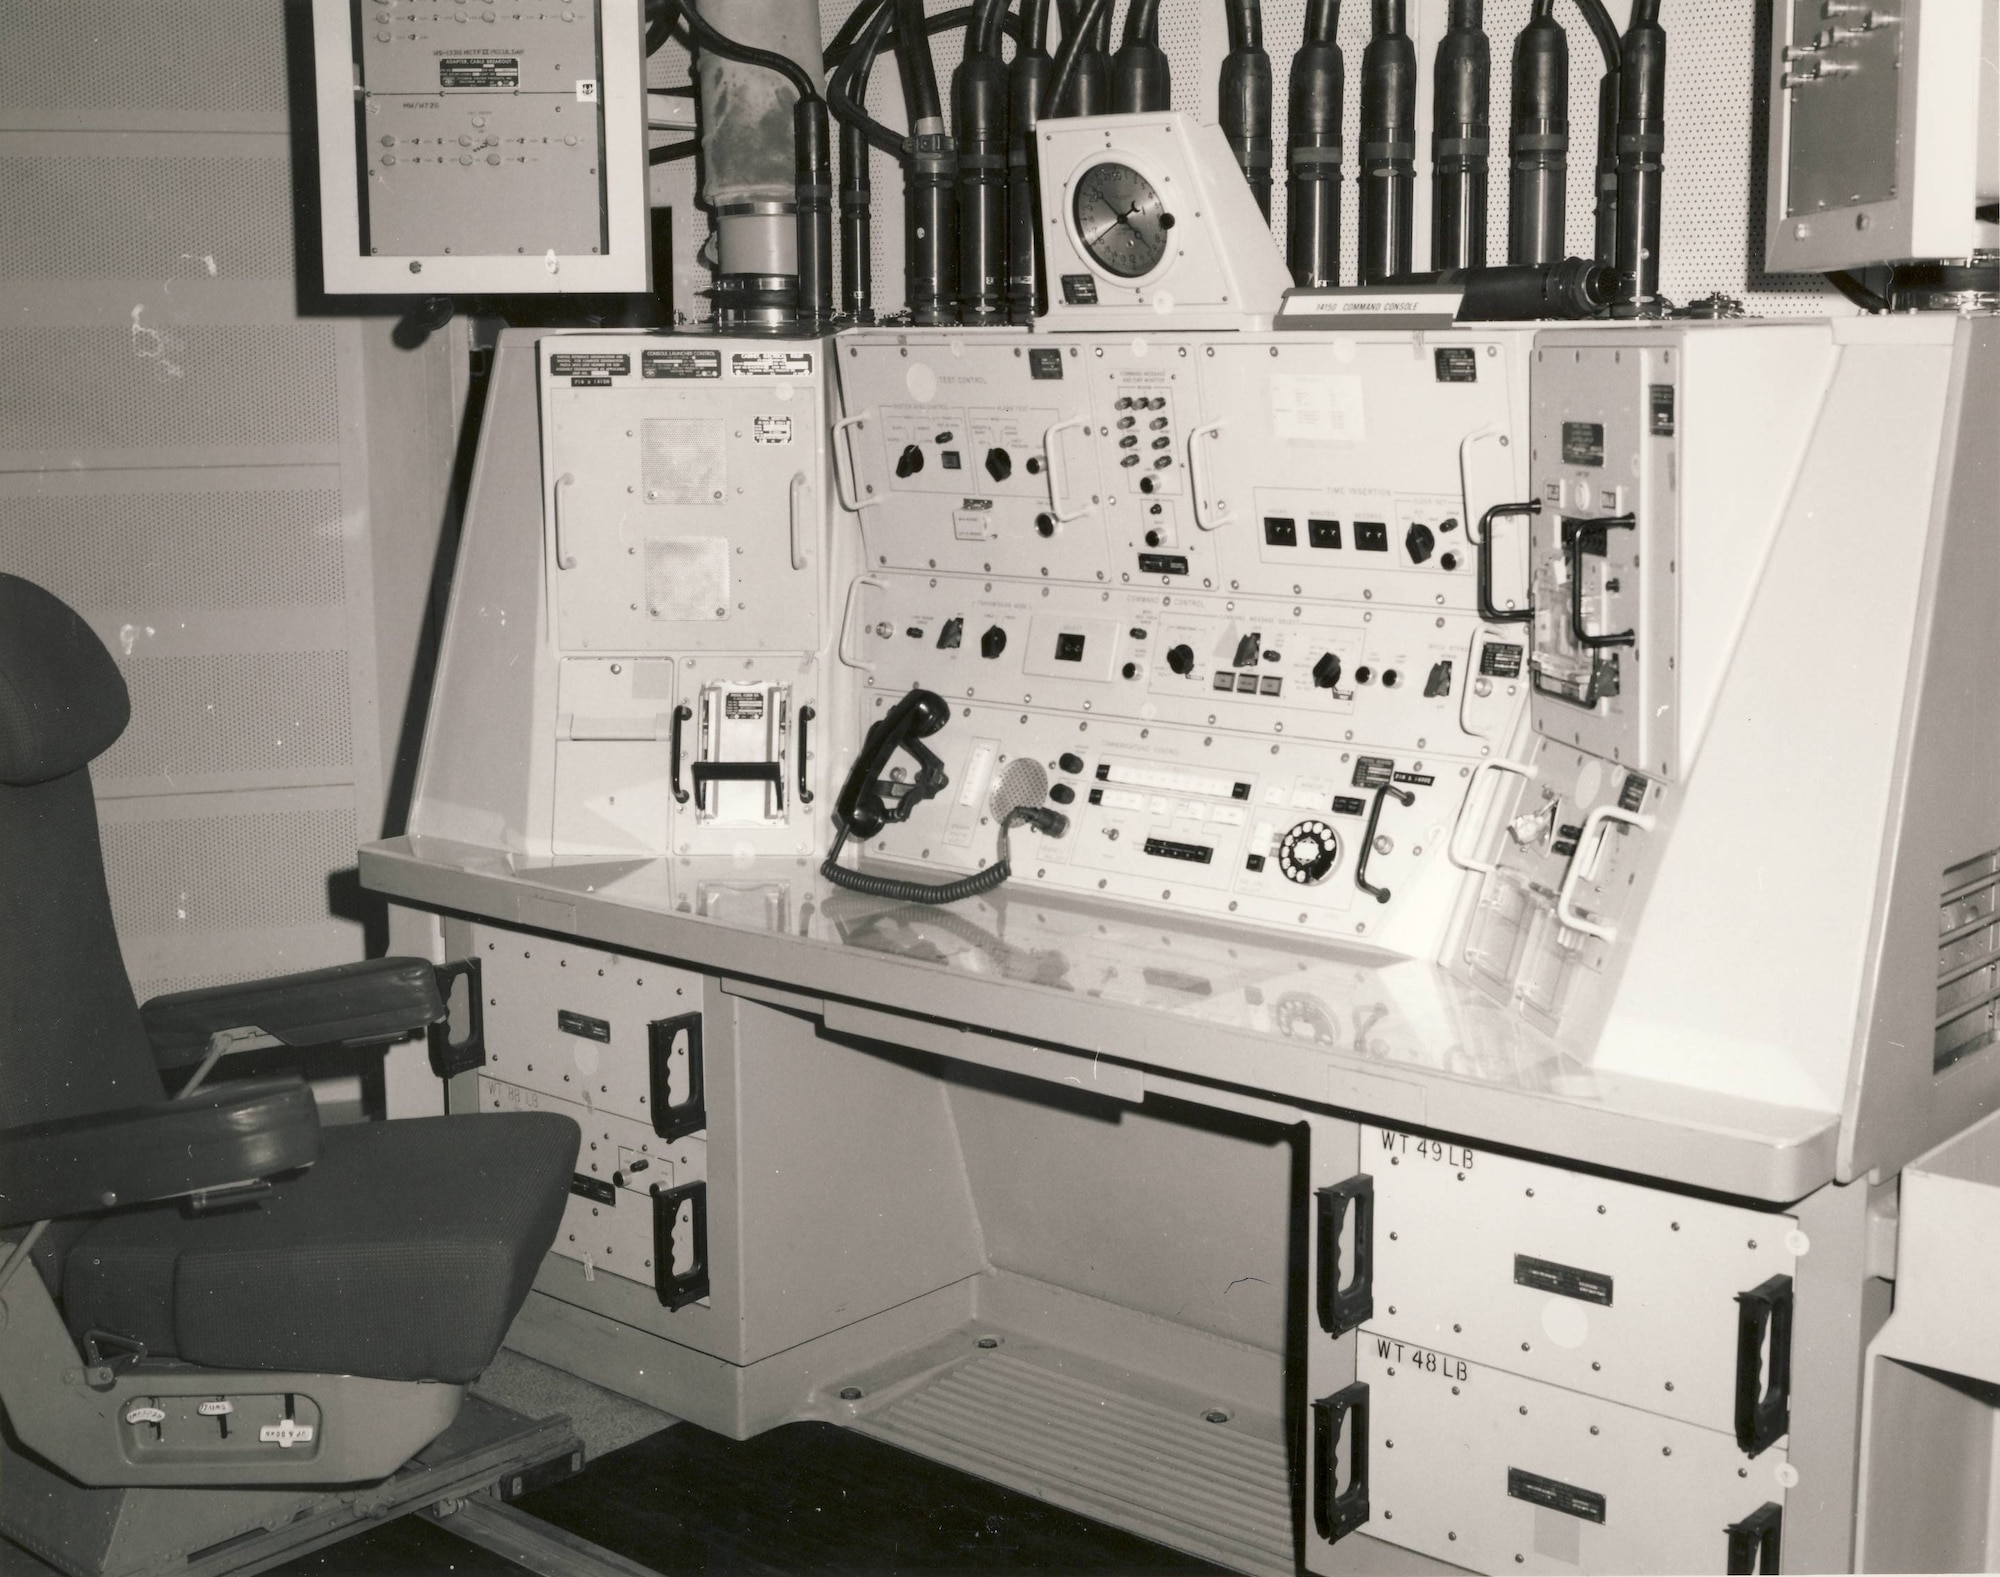 This control panel comprised part of the above-ground launch control facility at the Hill Engineering and Test Facility.